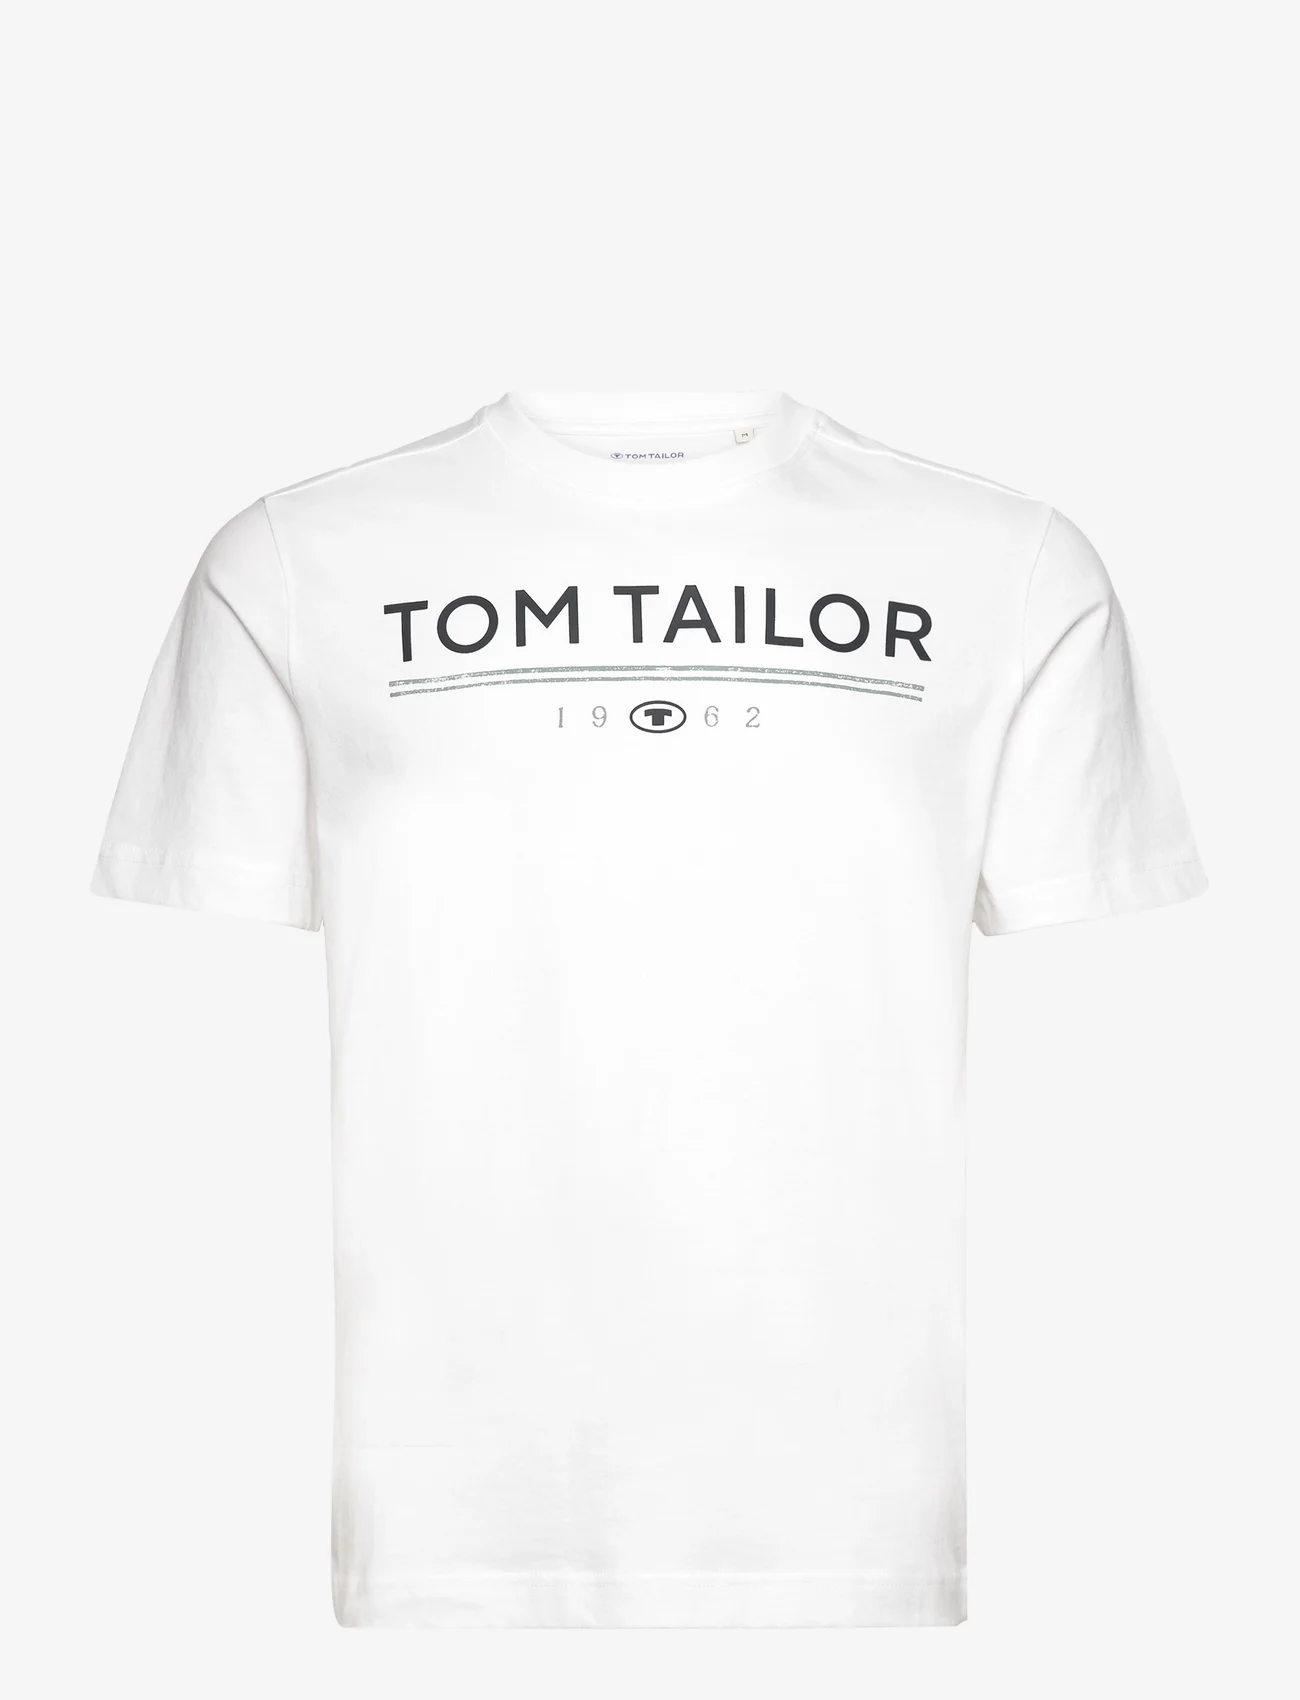 Tom Tailor - printed t-shirt - short-sleeved t-shirts - white - 1